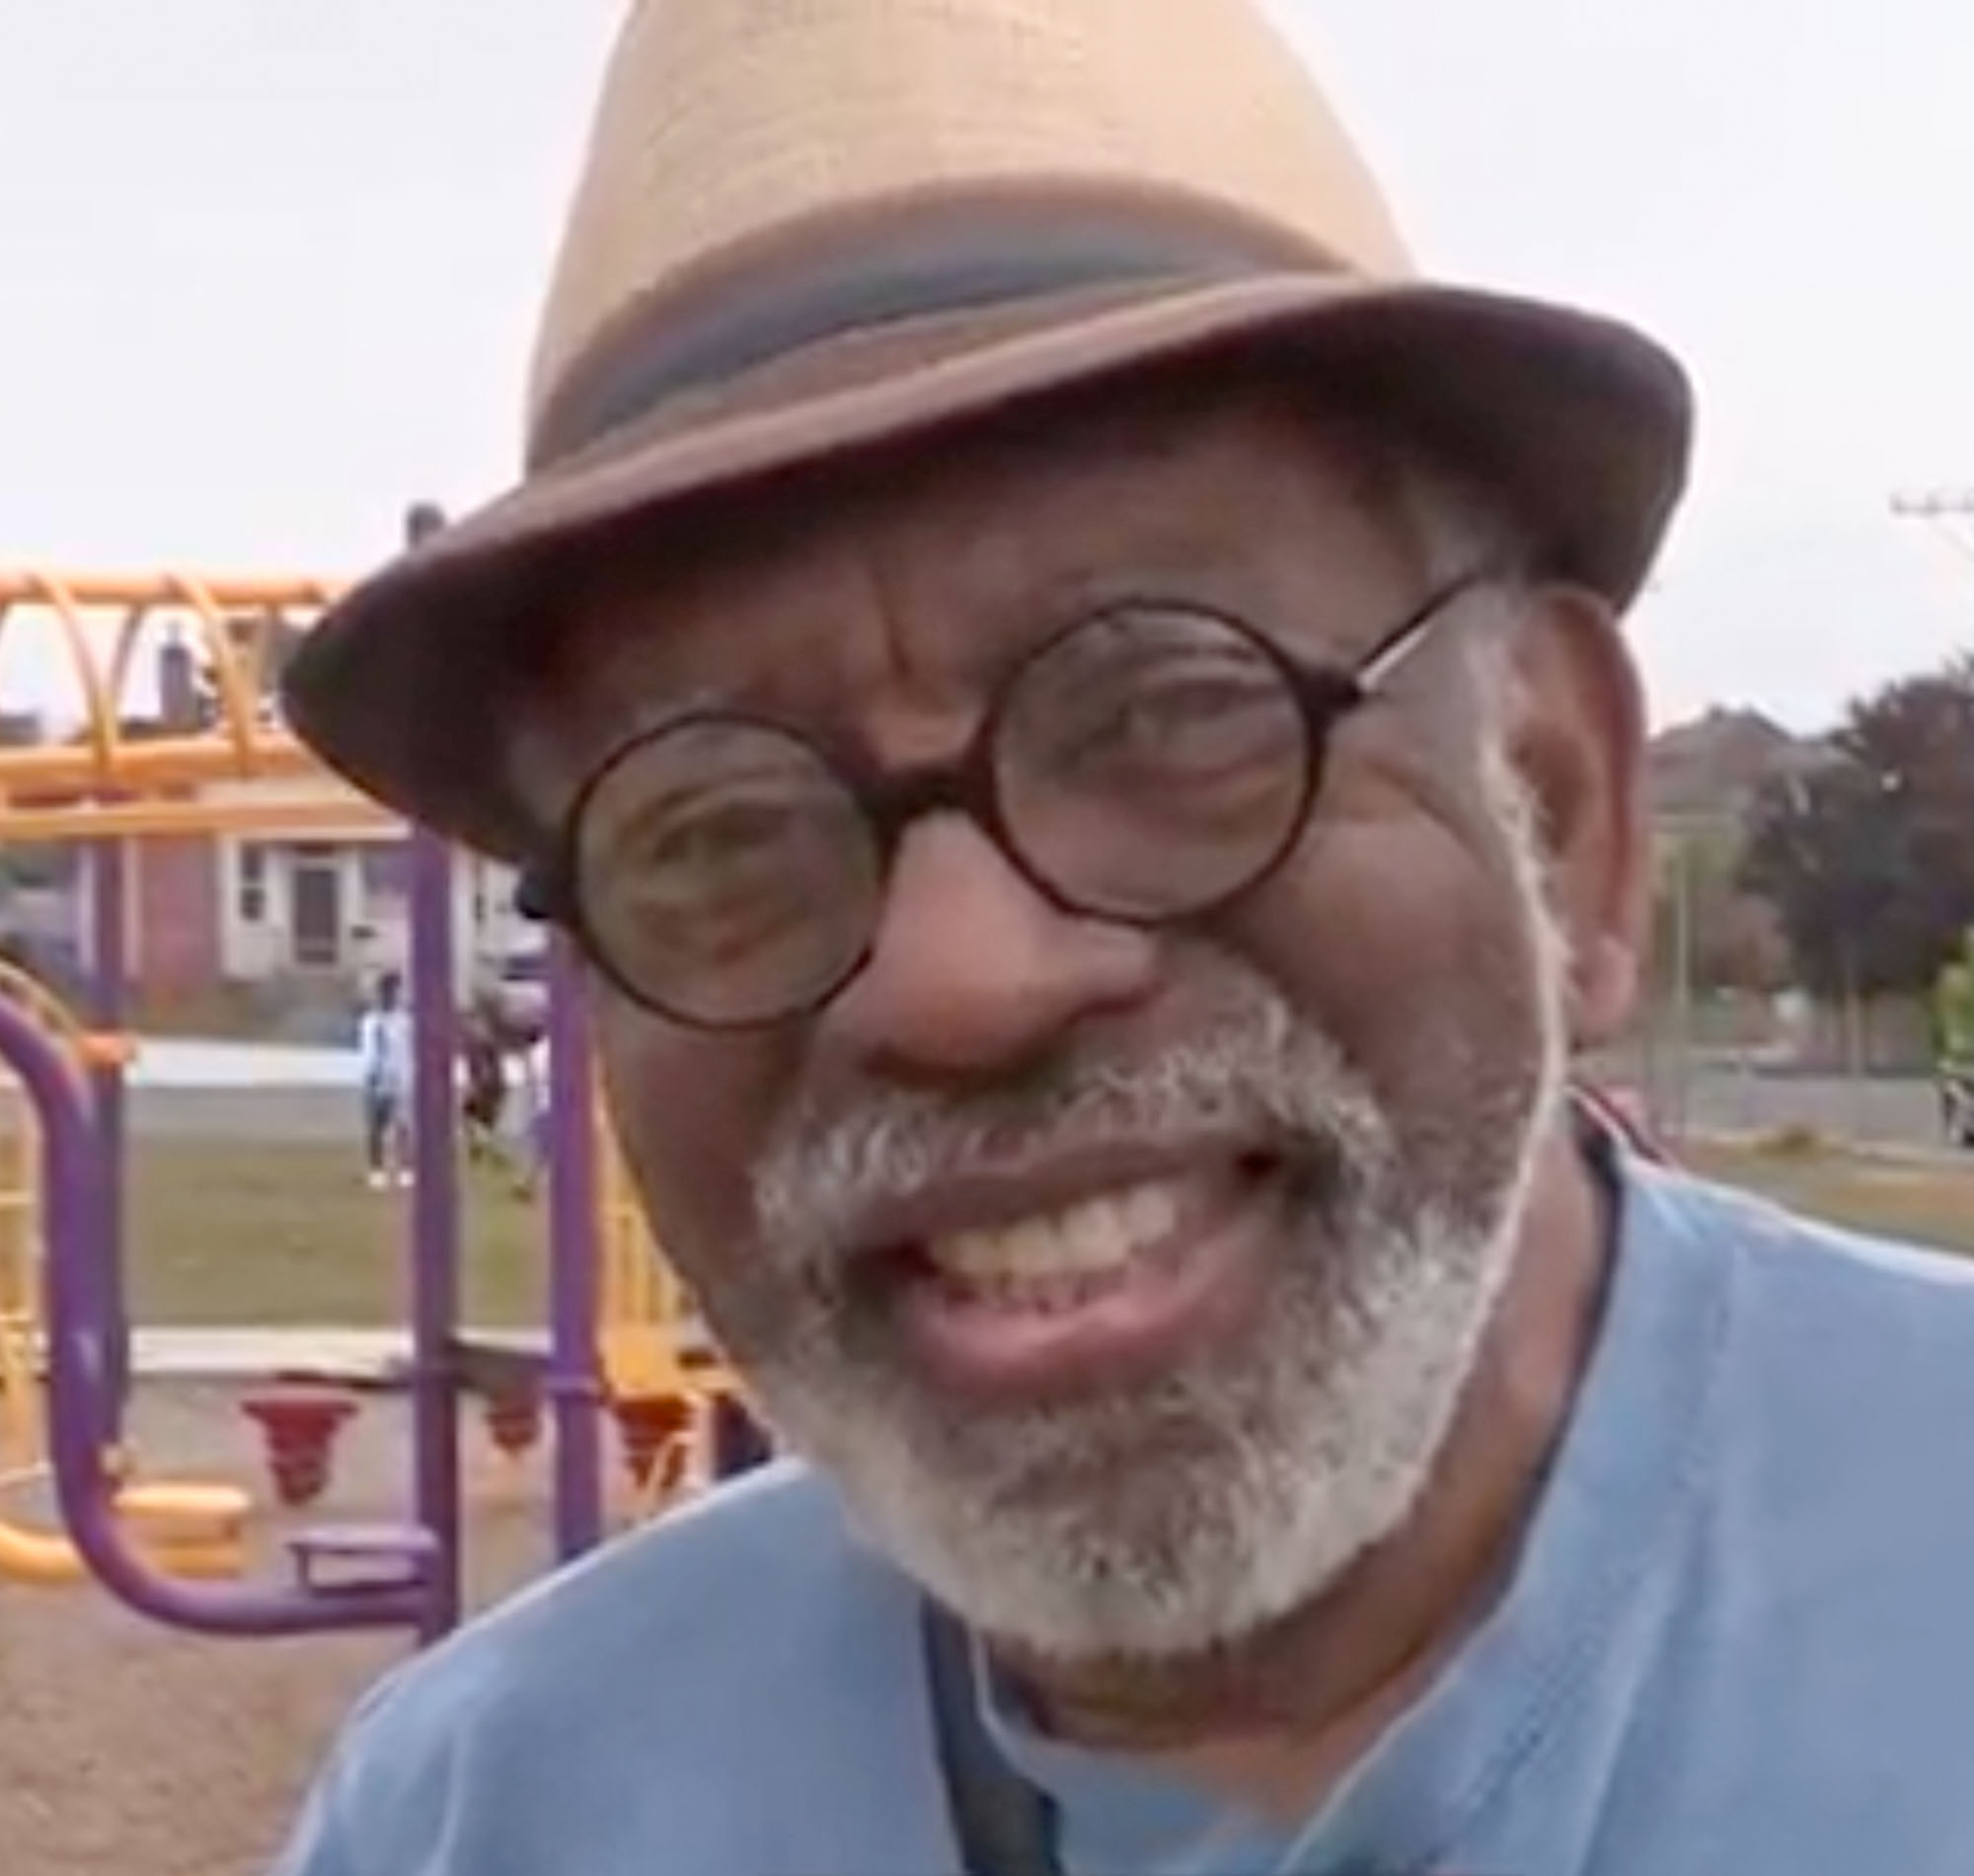 A man with round glasses and a fedora smiling, standing in a playground